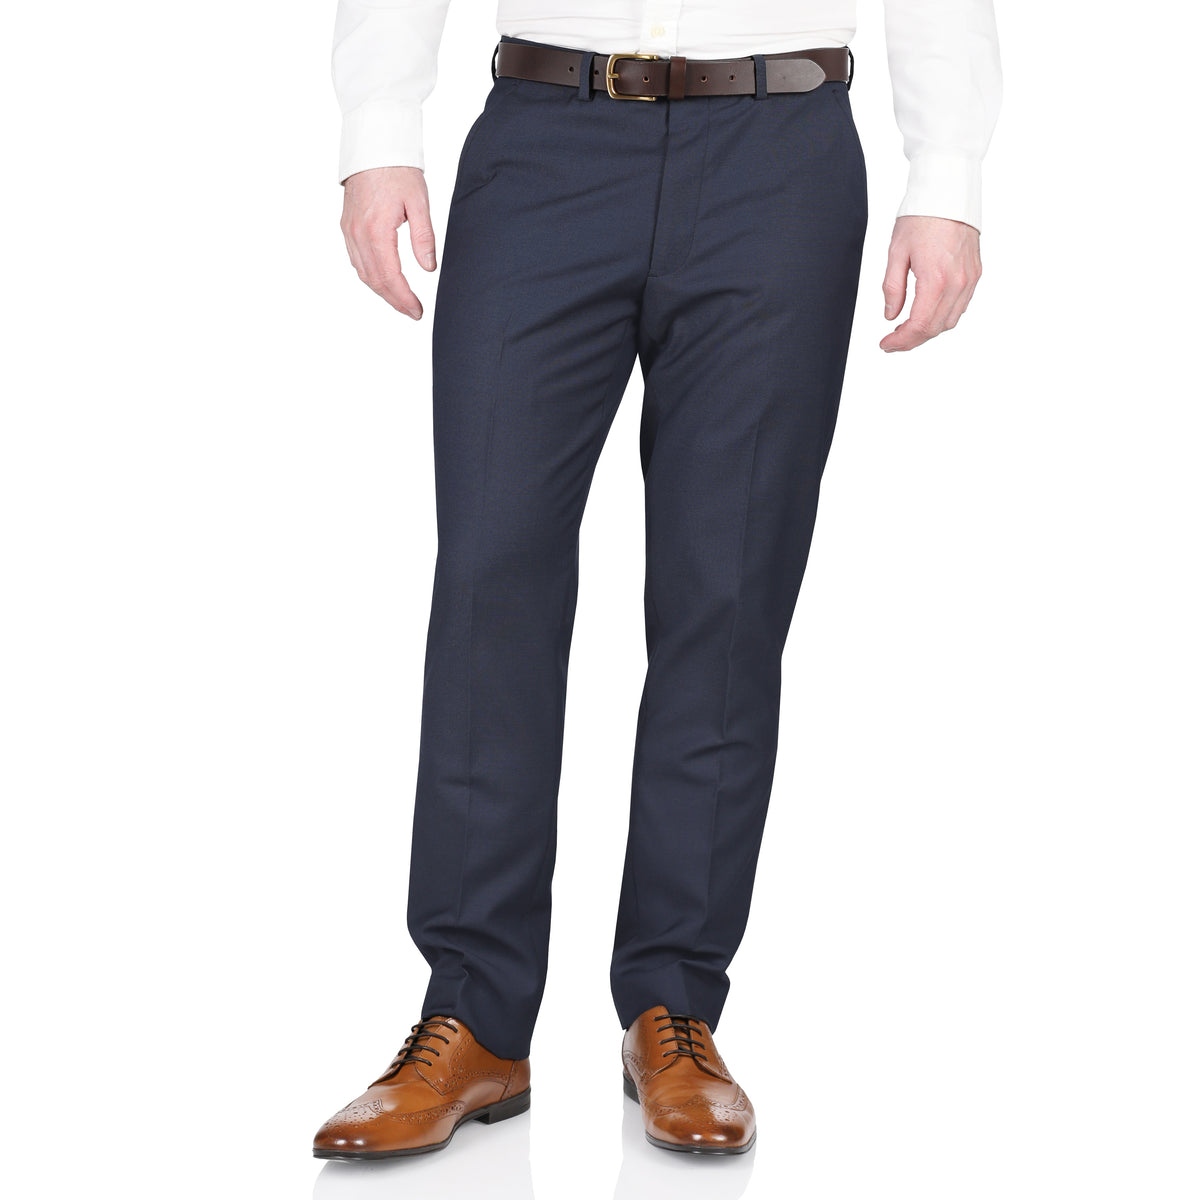 Simon Jersey Alderley Tailored Fit Formal Trousers | ButtonFresh.co.uk